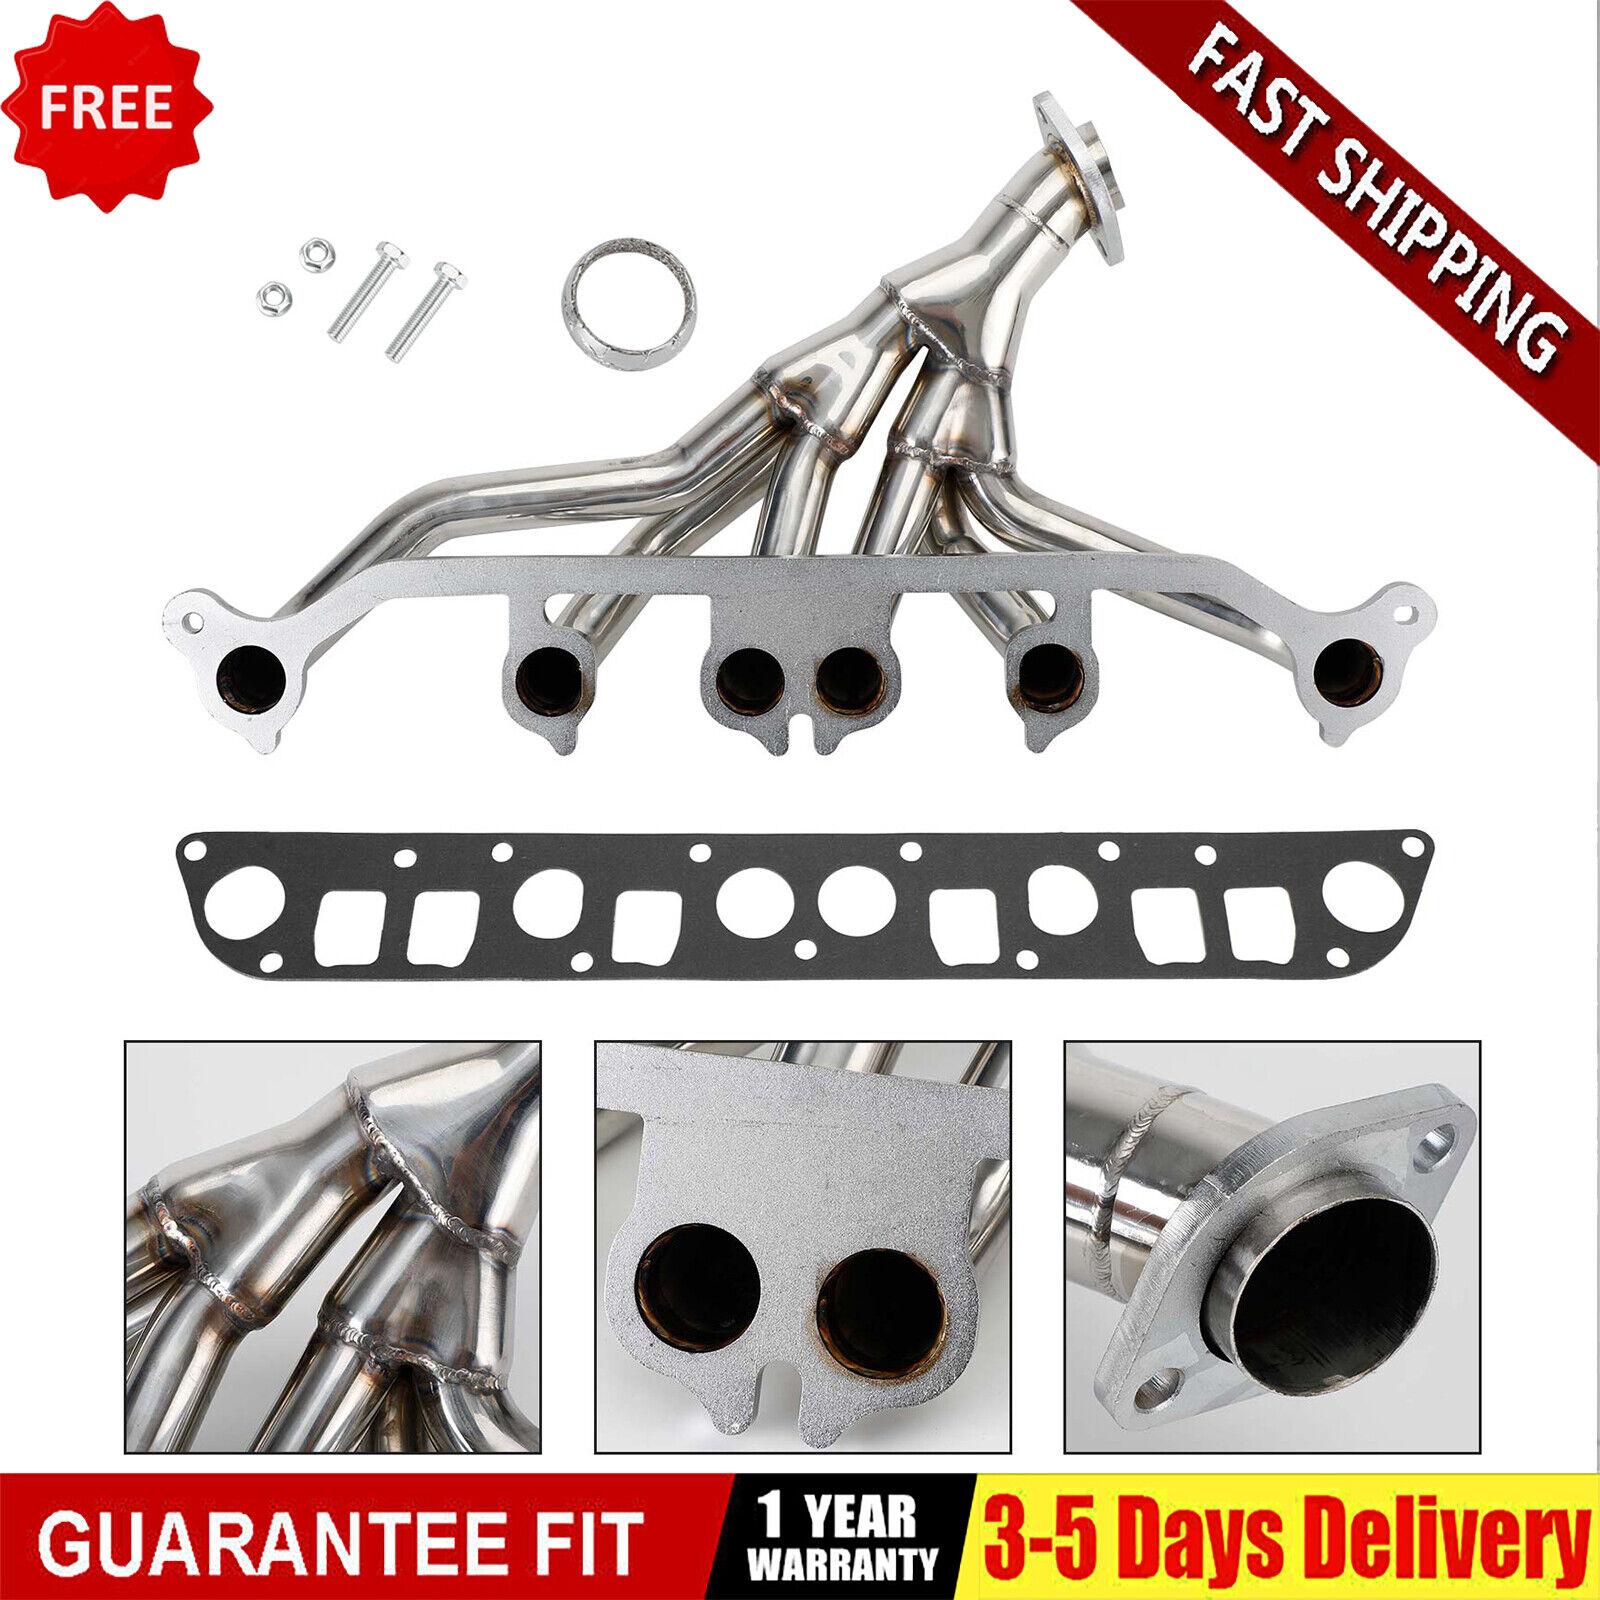 NEW Stainless Exhaust Manifold For Jeep Grand Cherokee Wrangler 4.0L V6